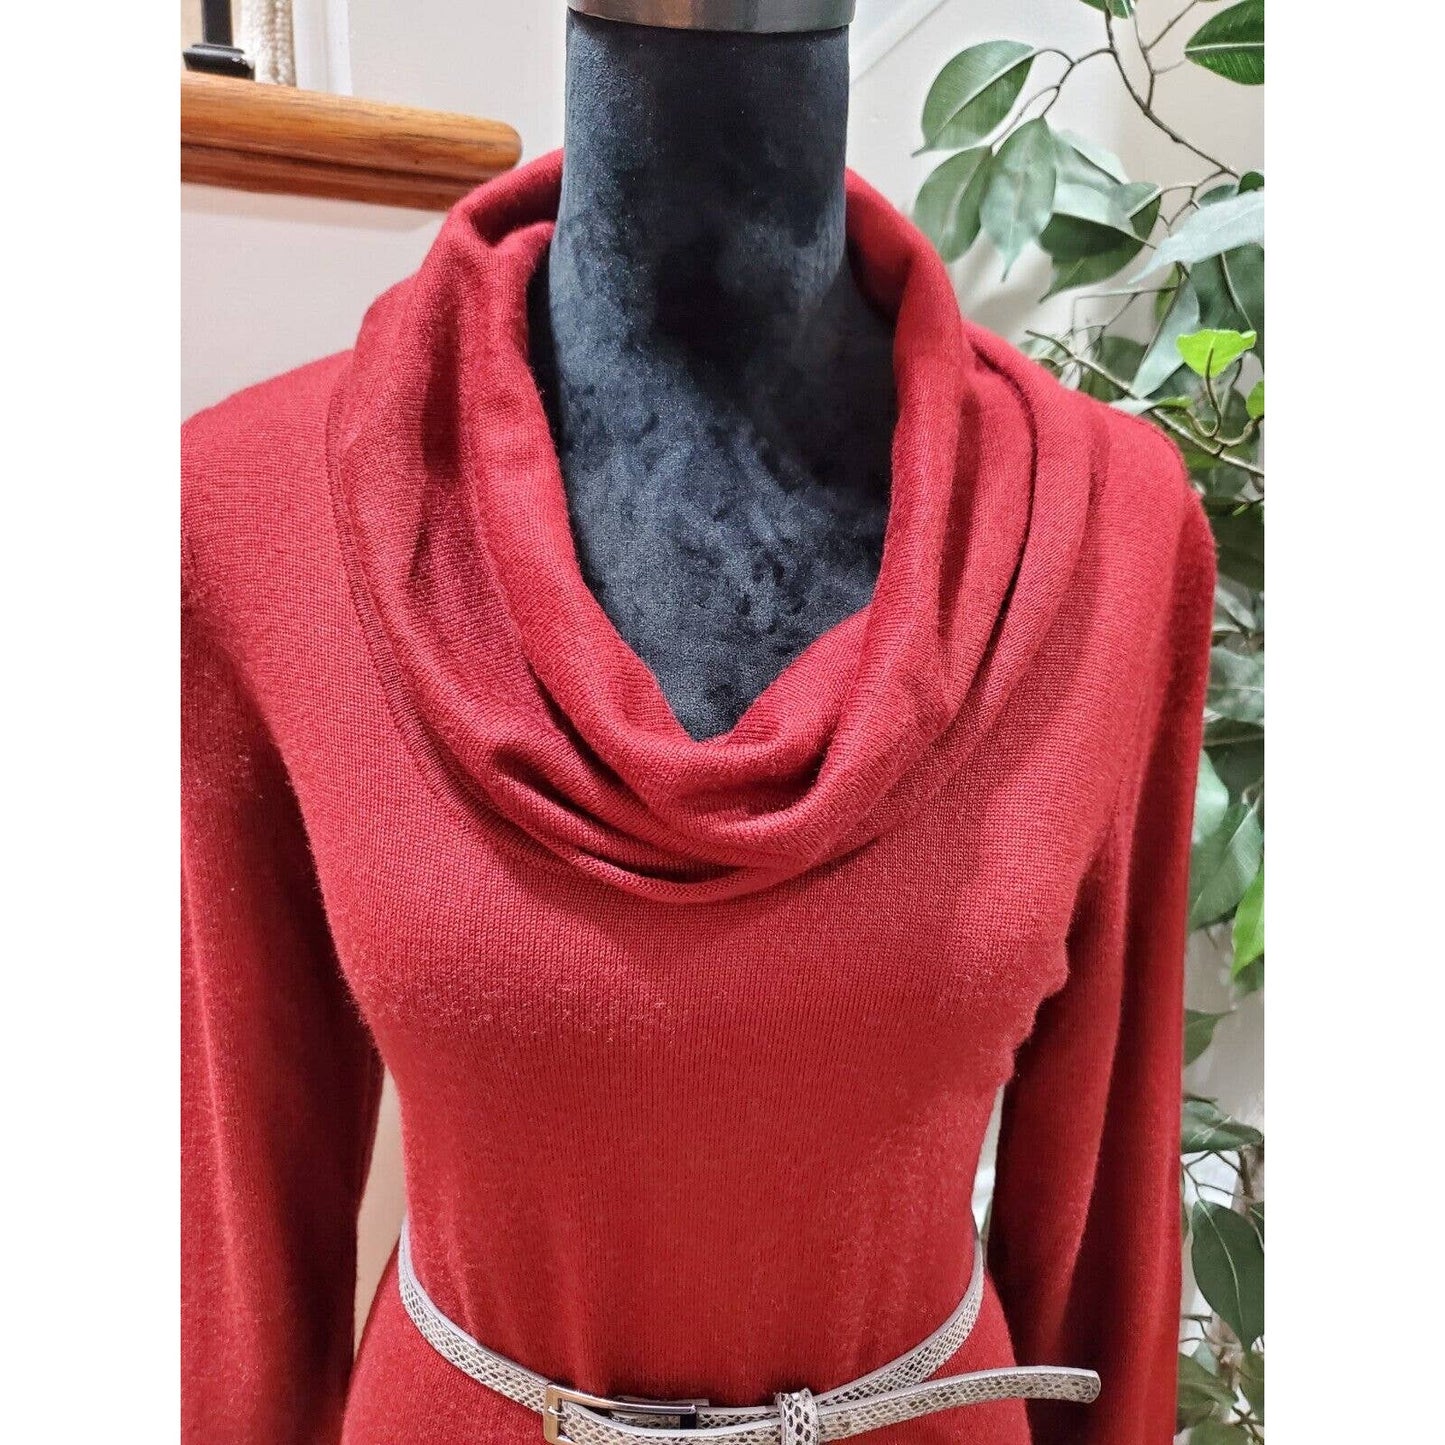 The Limited Women's Red Sweater Cowl Neck Long Sleeve Knee Length Dress Size L